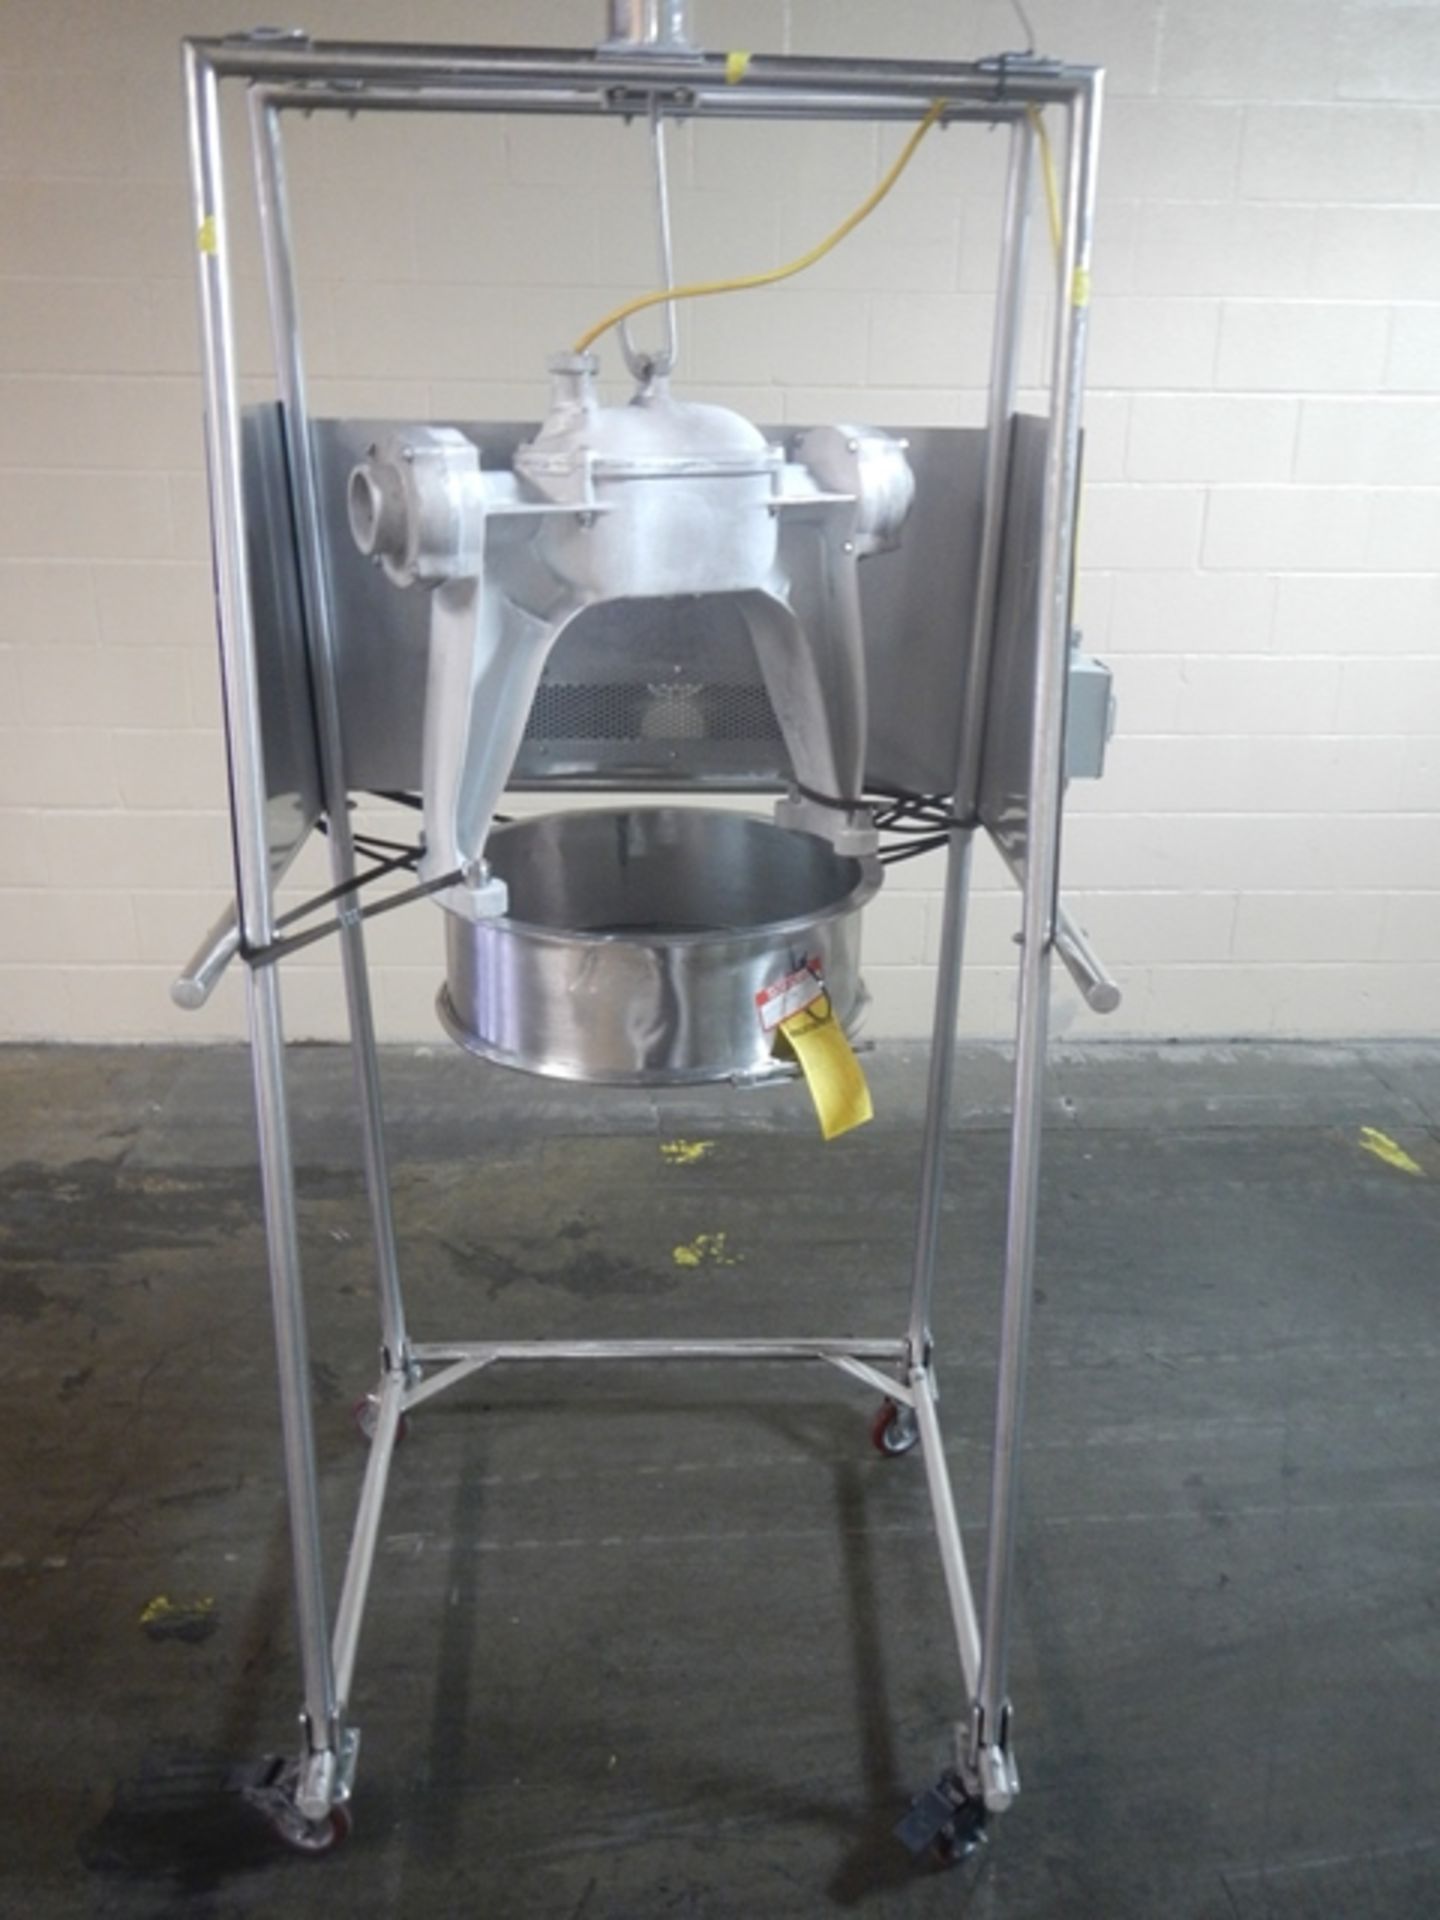 Foundry Supplies sieve, model Universal Roto 8, 20" diameter screening section, 115 volt mounted